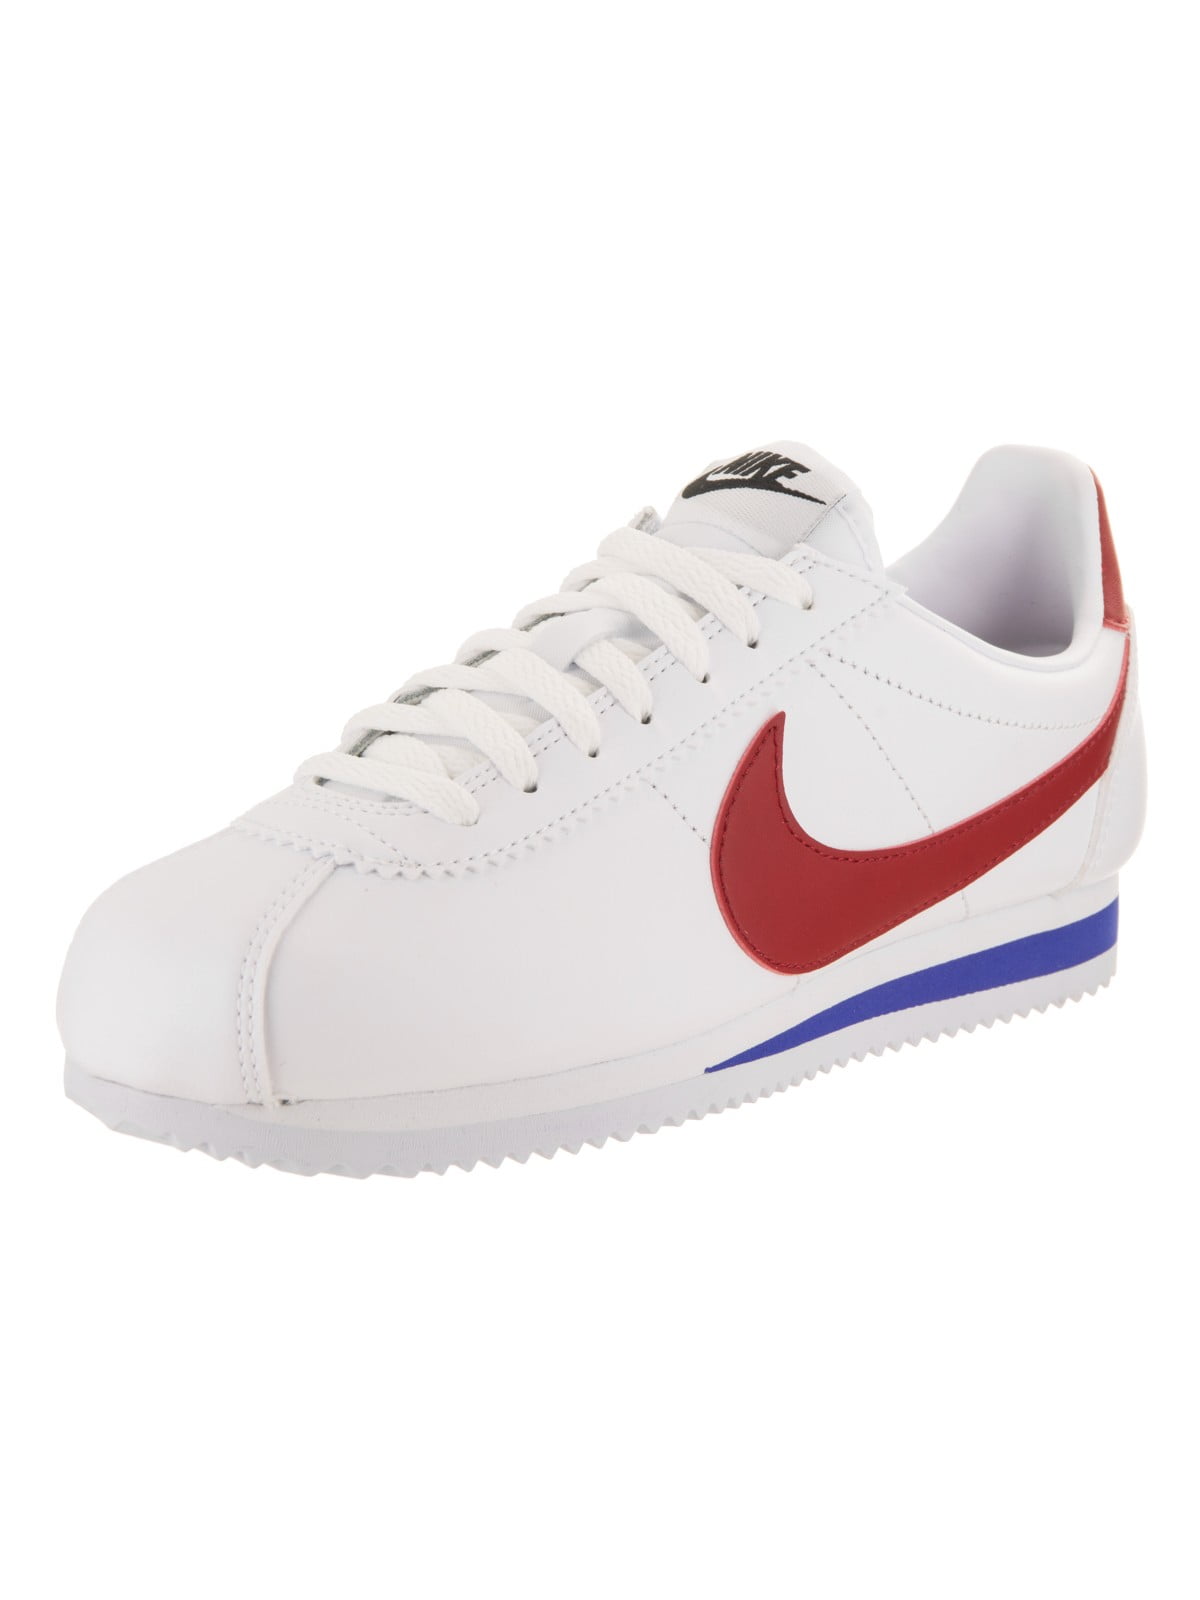 Nike Classic Leather Women's Low-Top Ladies Trainers Tennis Shoes Black or White (White/Varsity Red/Varsity Royal, - Walmart.com